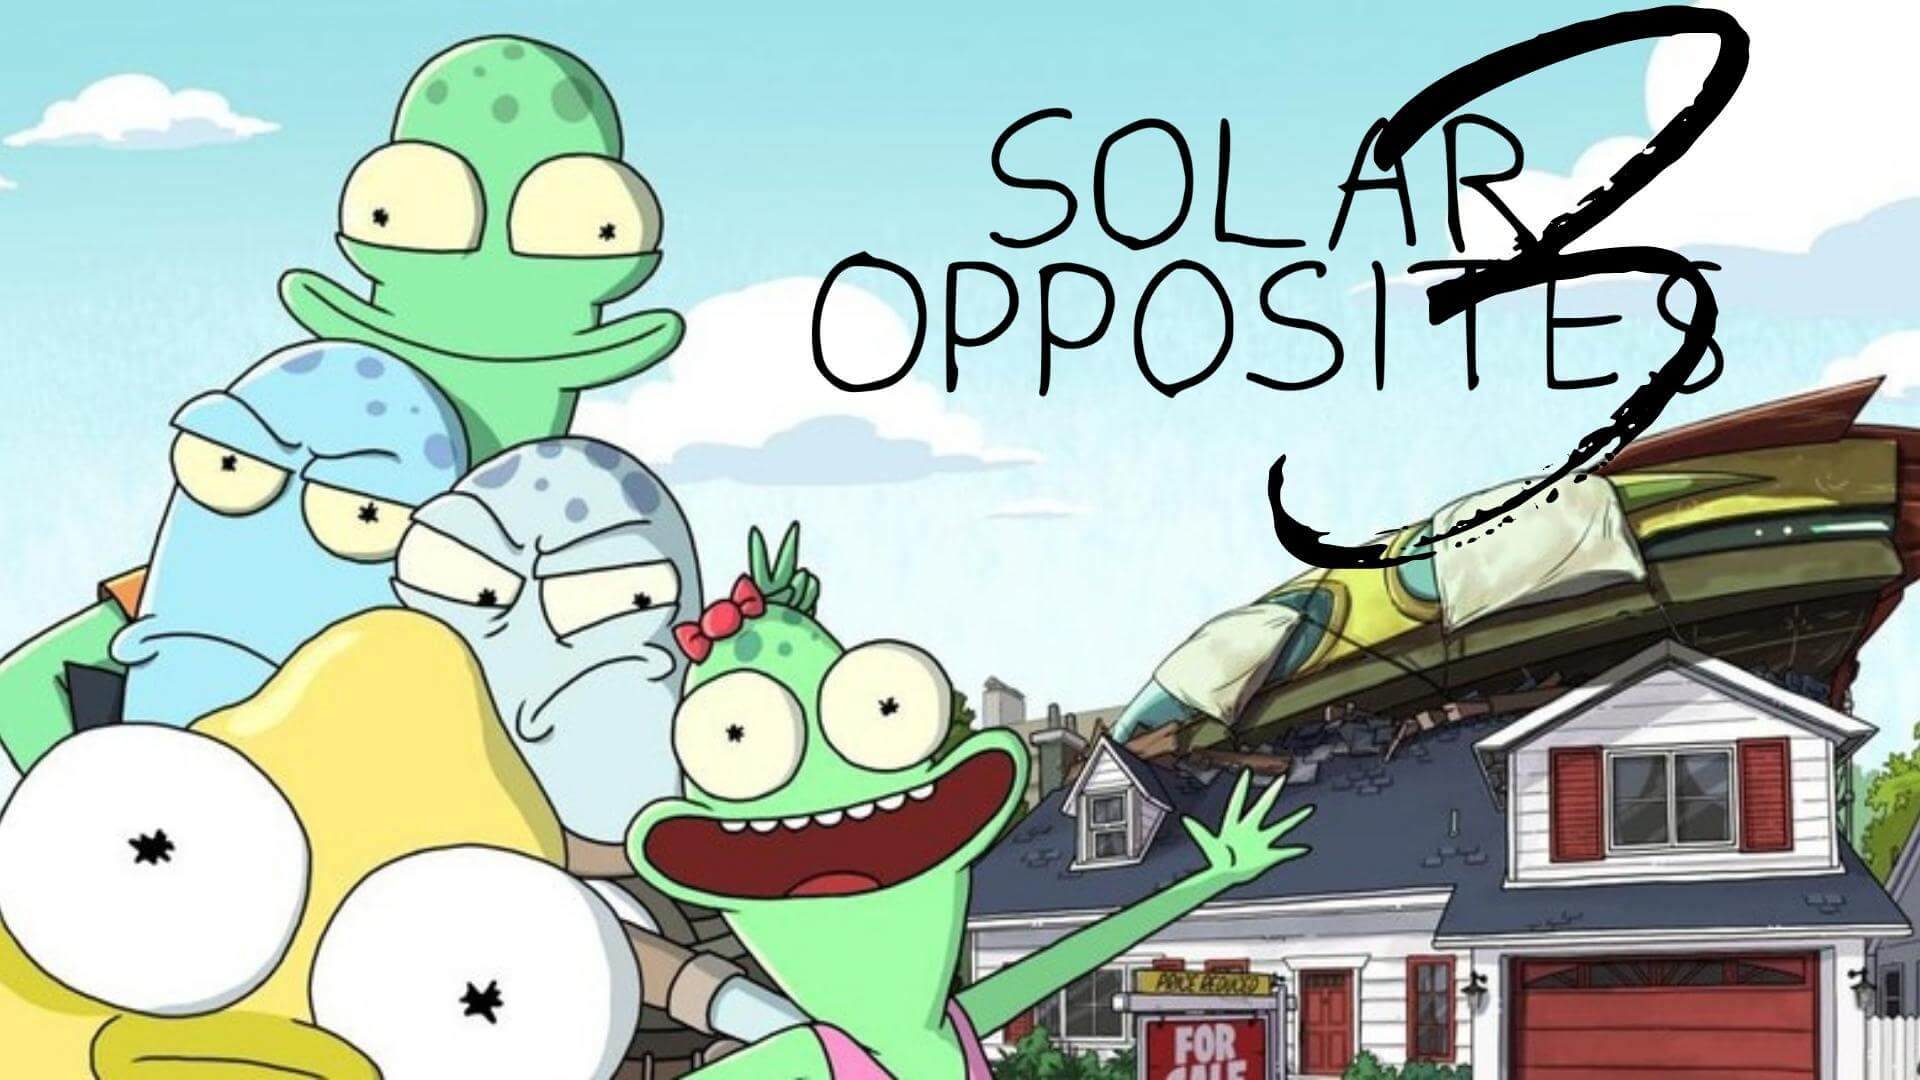 when is solar opposites season 3 coming out